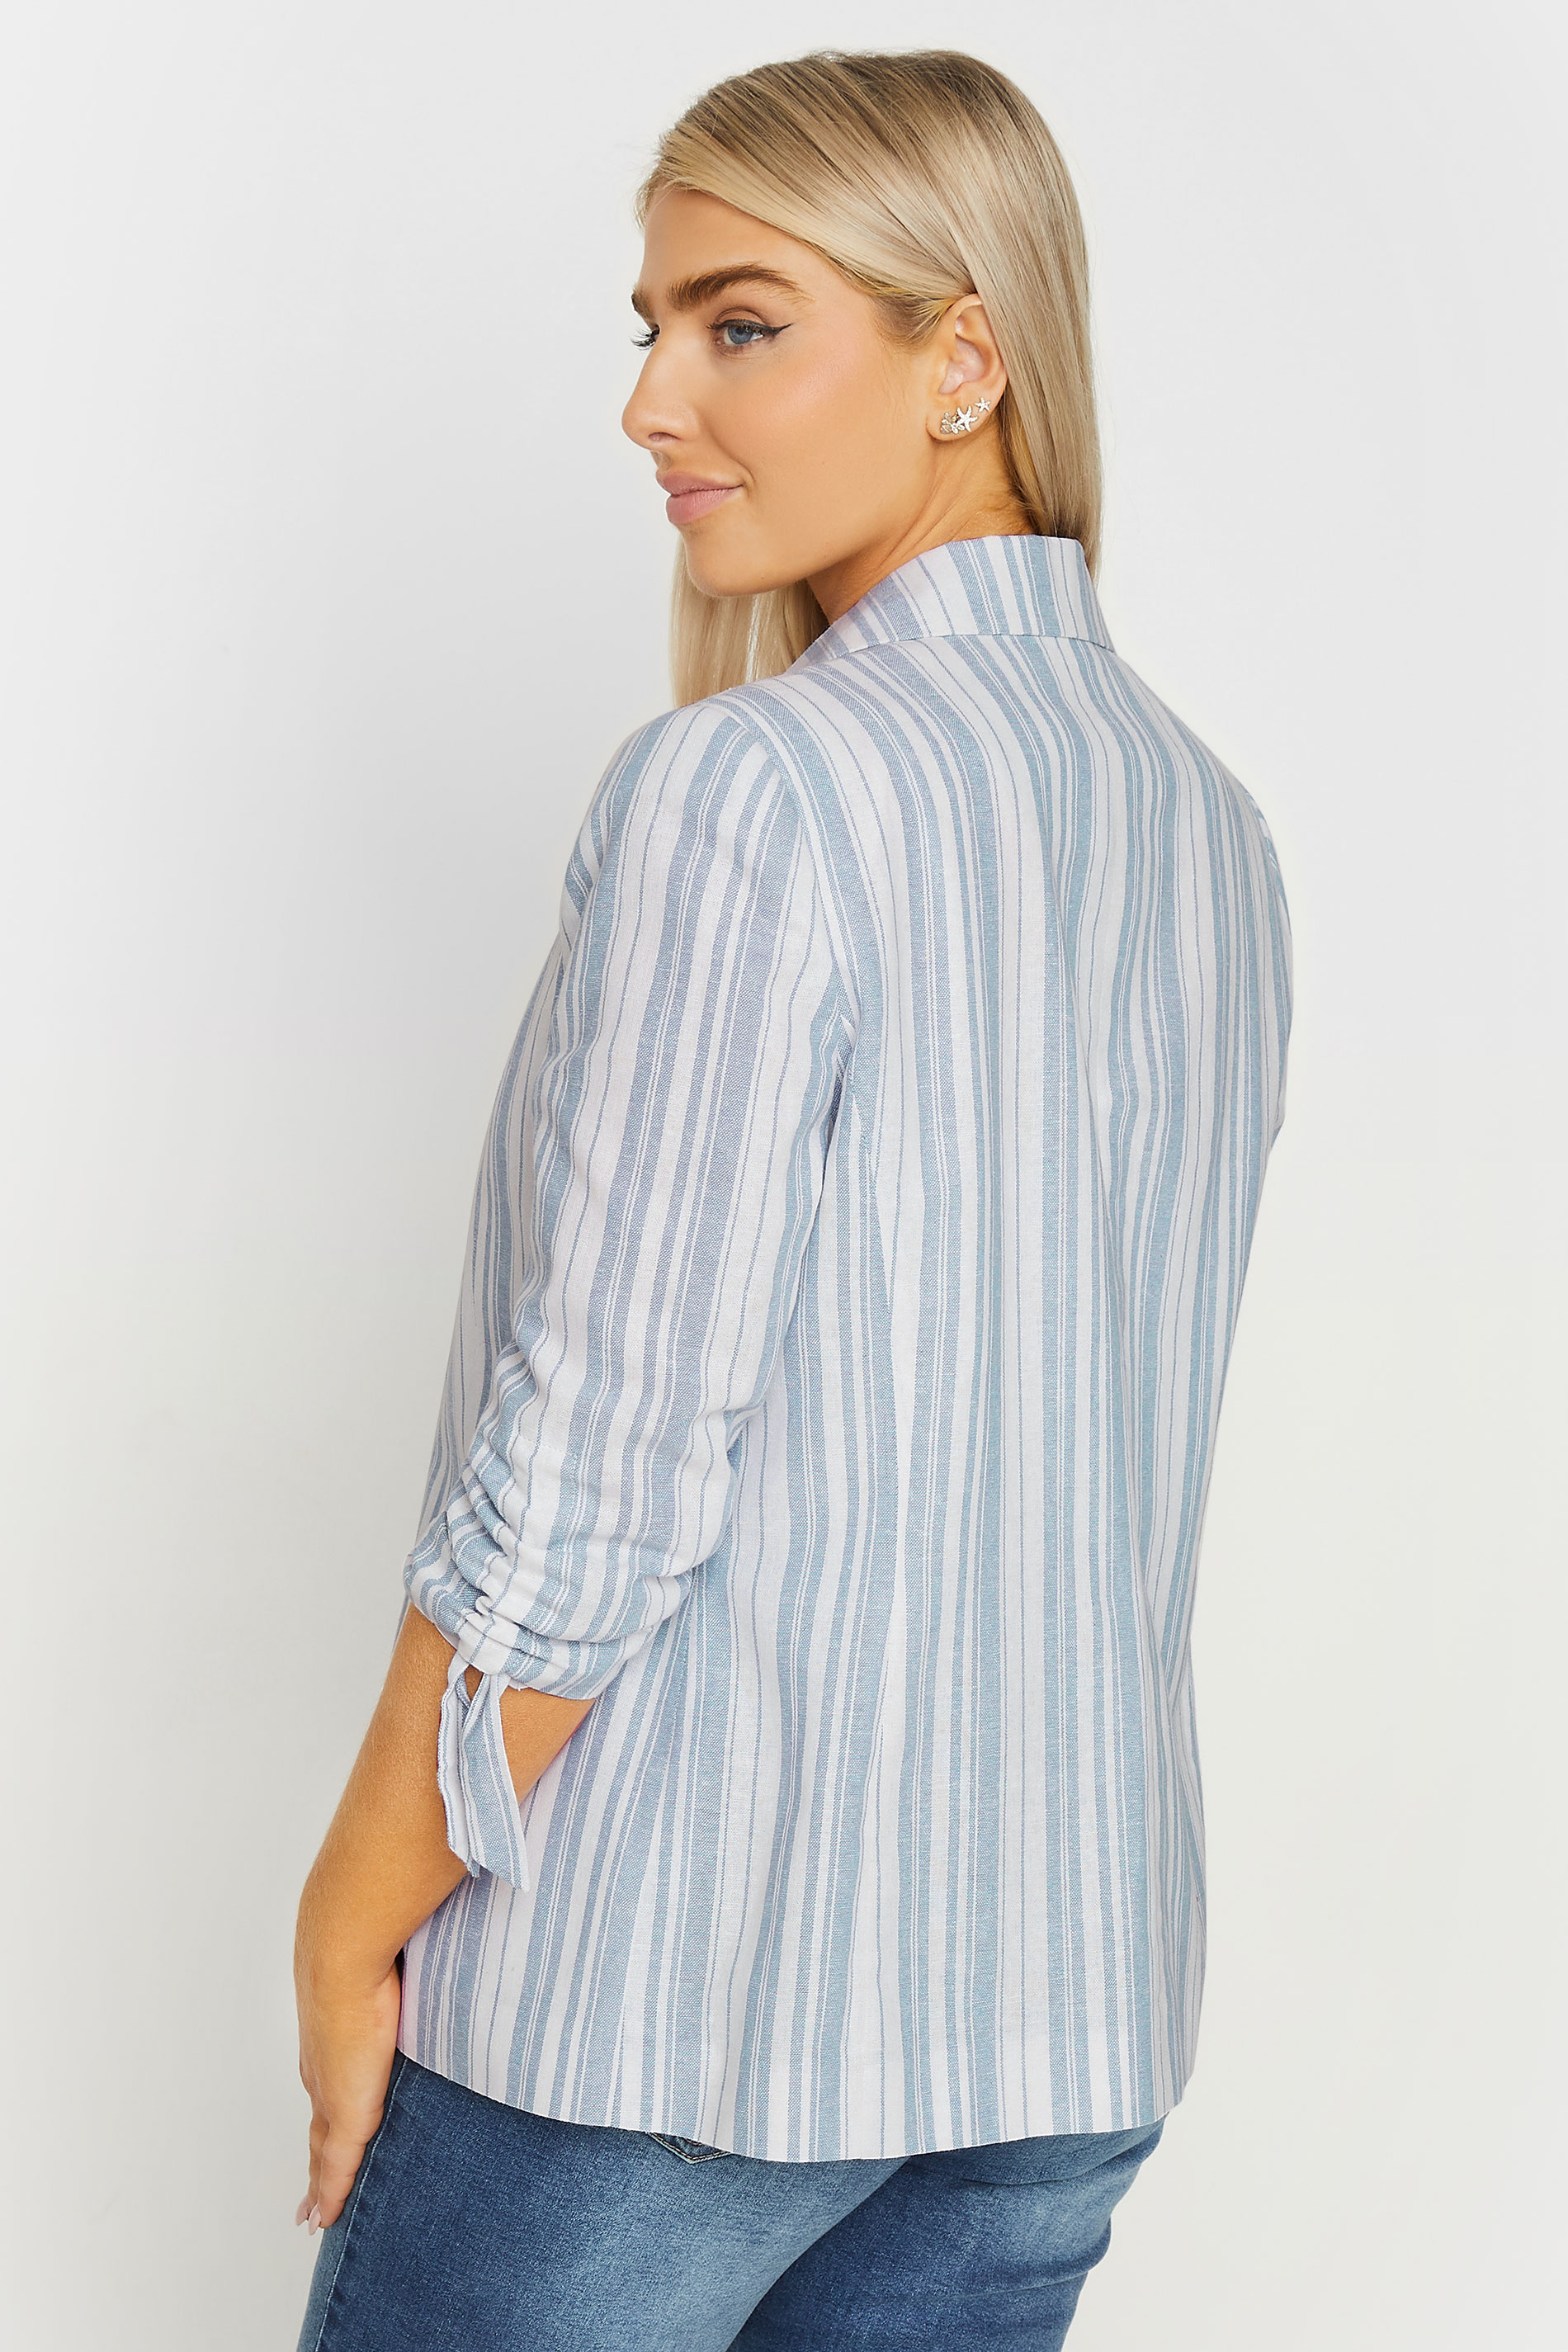 M&Co White & Blue Striped Ruched Sleeve Blazer | M&Co 3